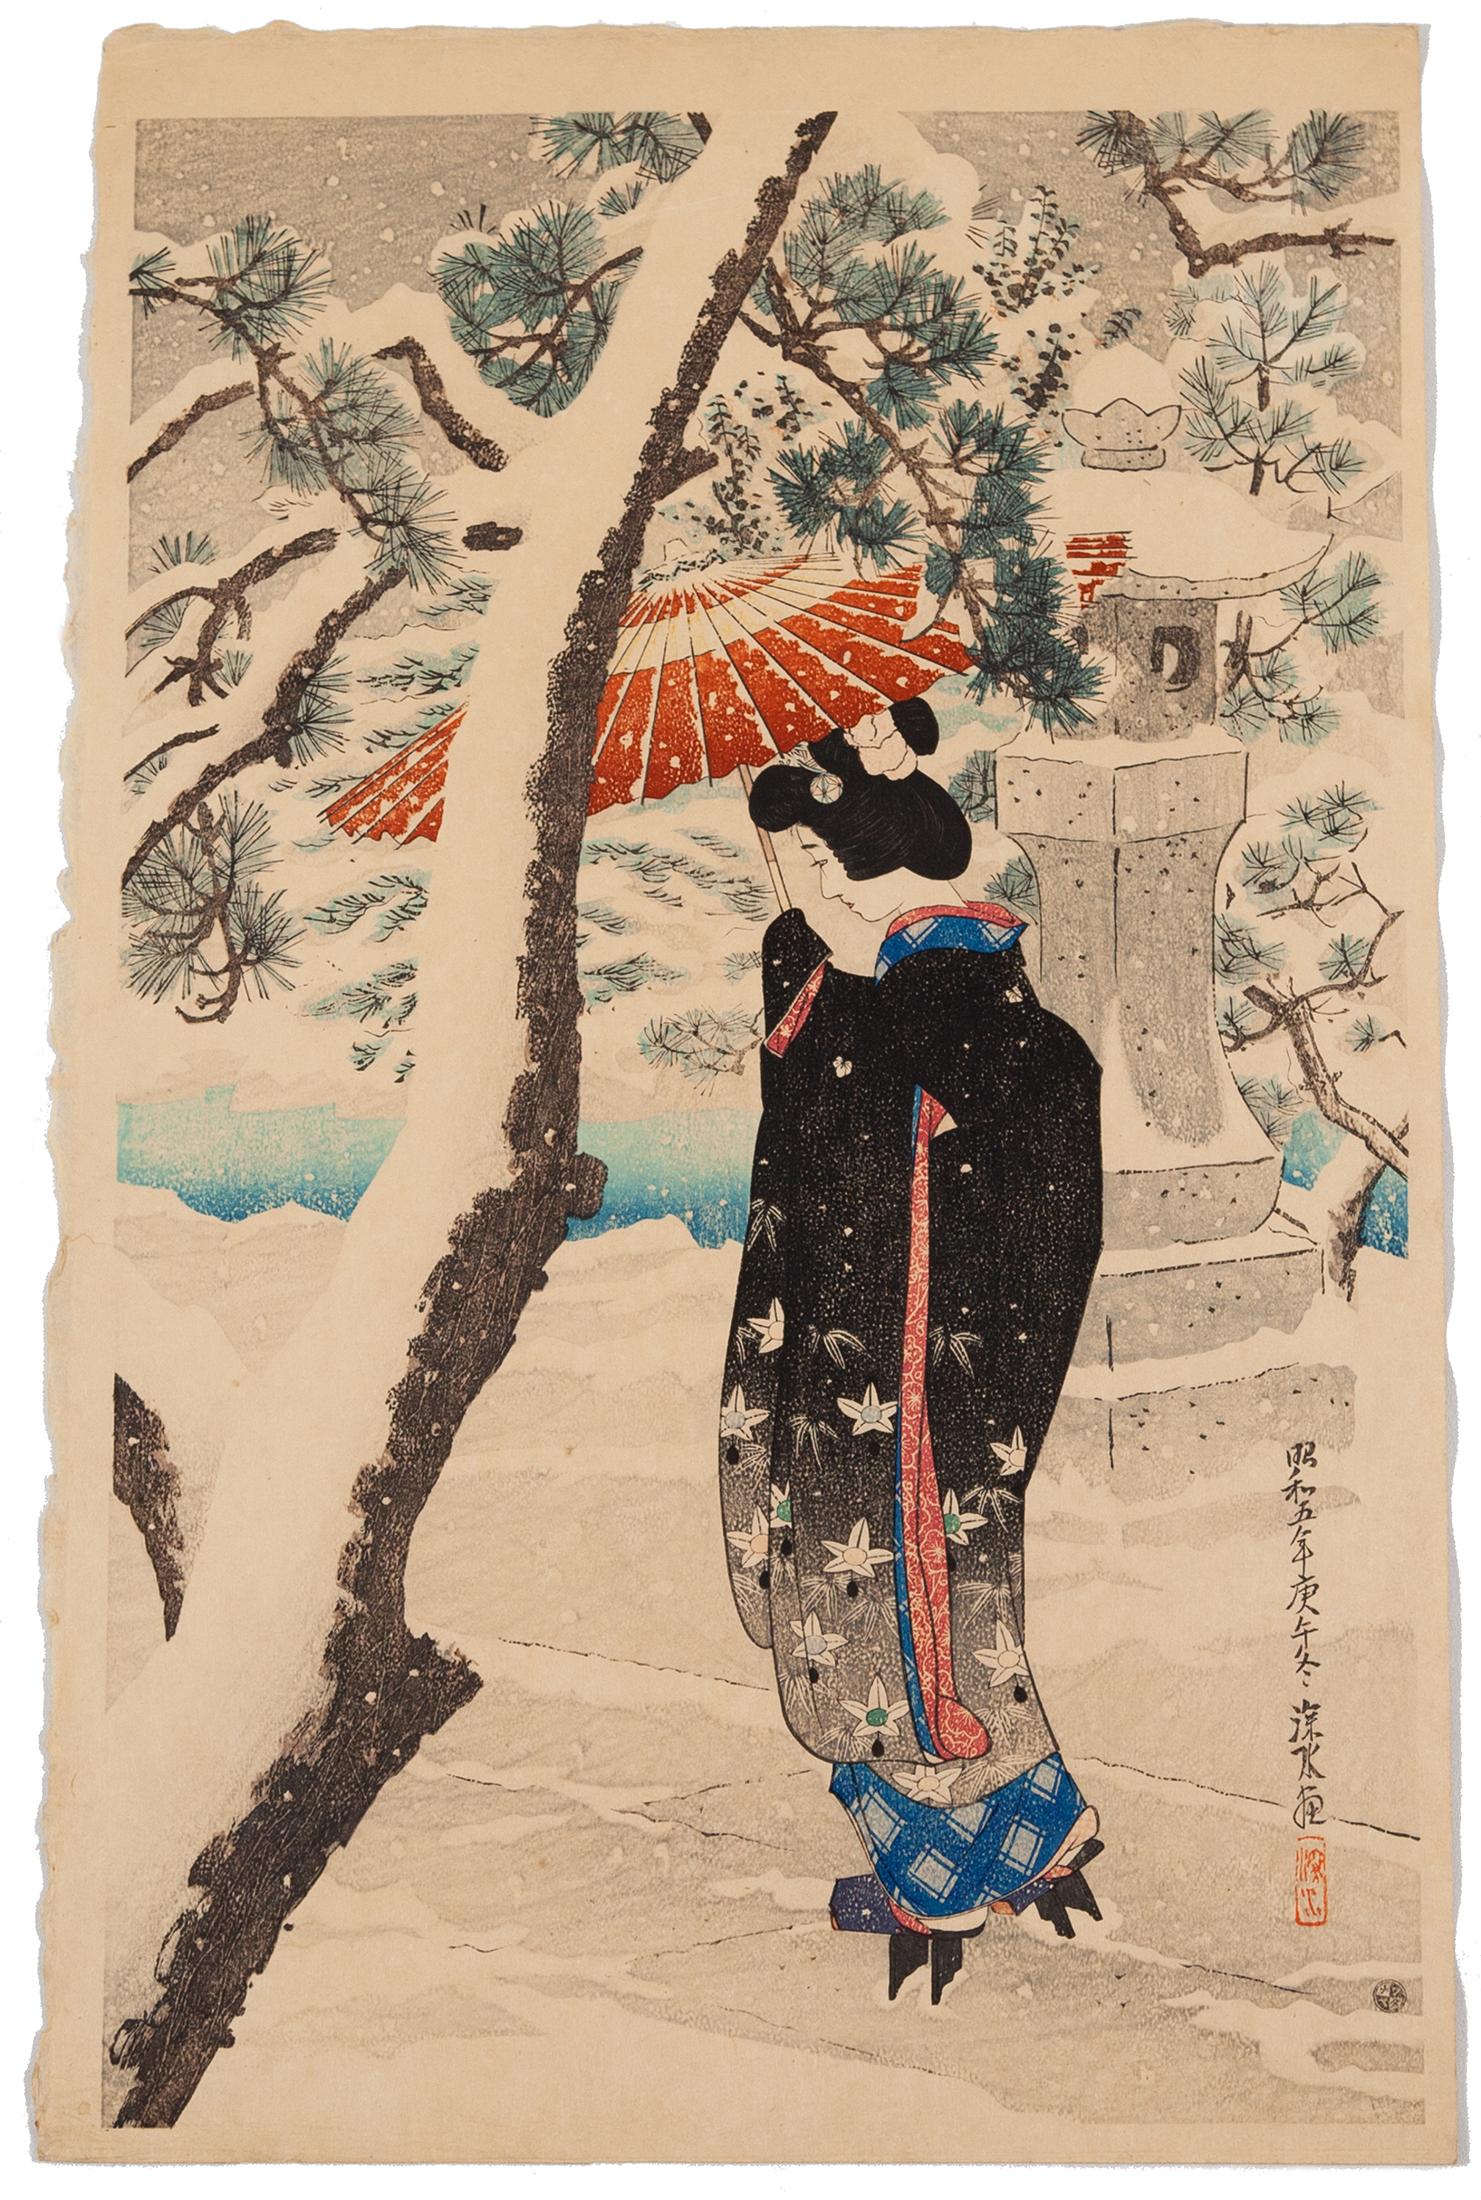 Artist: Ito Shinsui (1898-1972)
Title: Snow at the Shrine 
Publisher: Watanabe Shozaburo
Date: 1930
Edition: 58/250
Dimensions: 27.8 x 43.2 cm

In a snow blanketed landscape, a young lady stands before a shrine. Her black naga-haori is coloured with